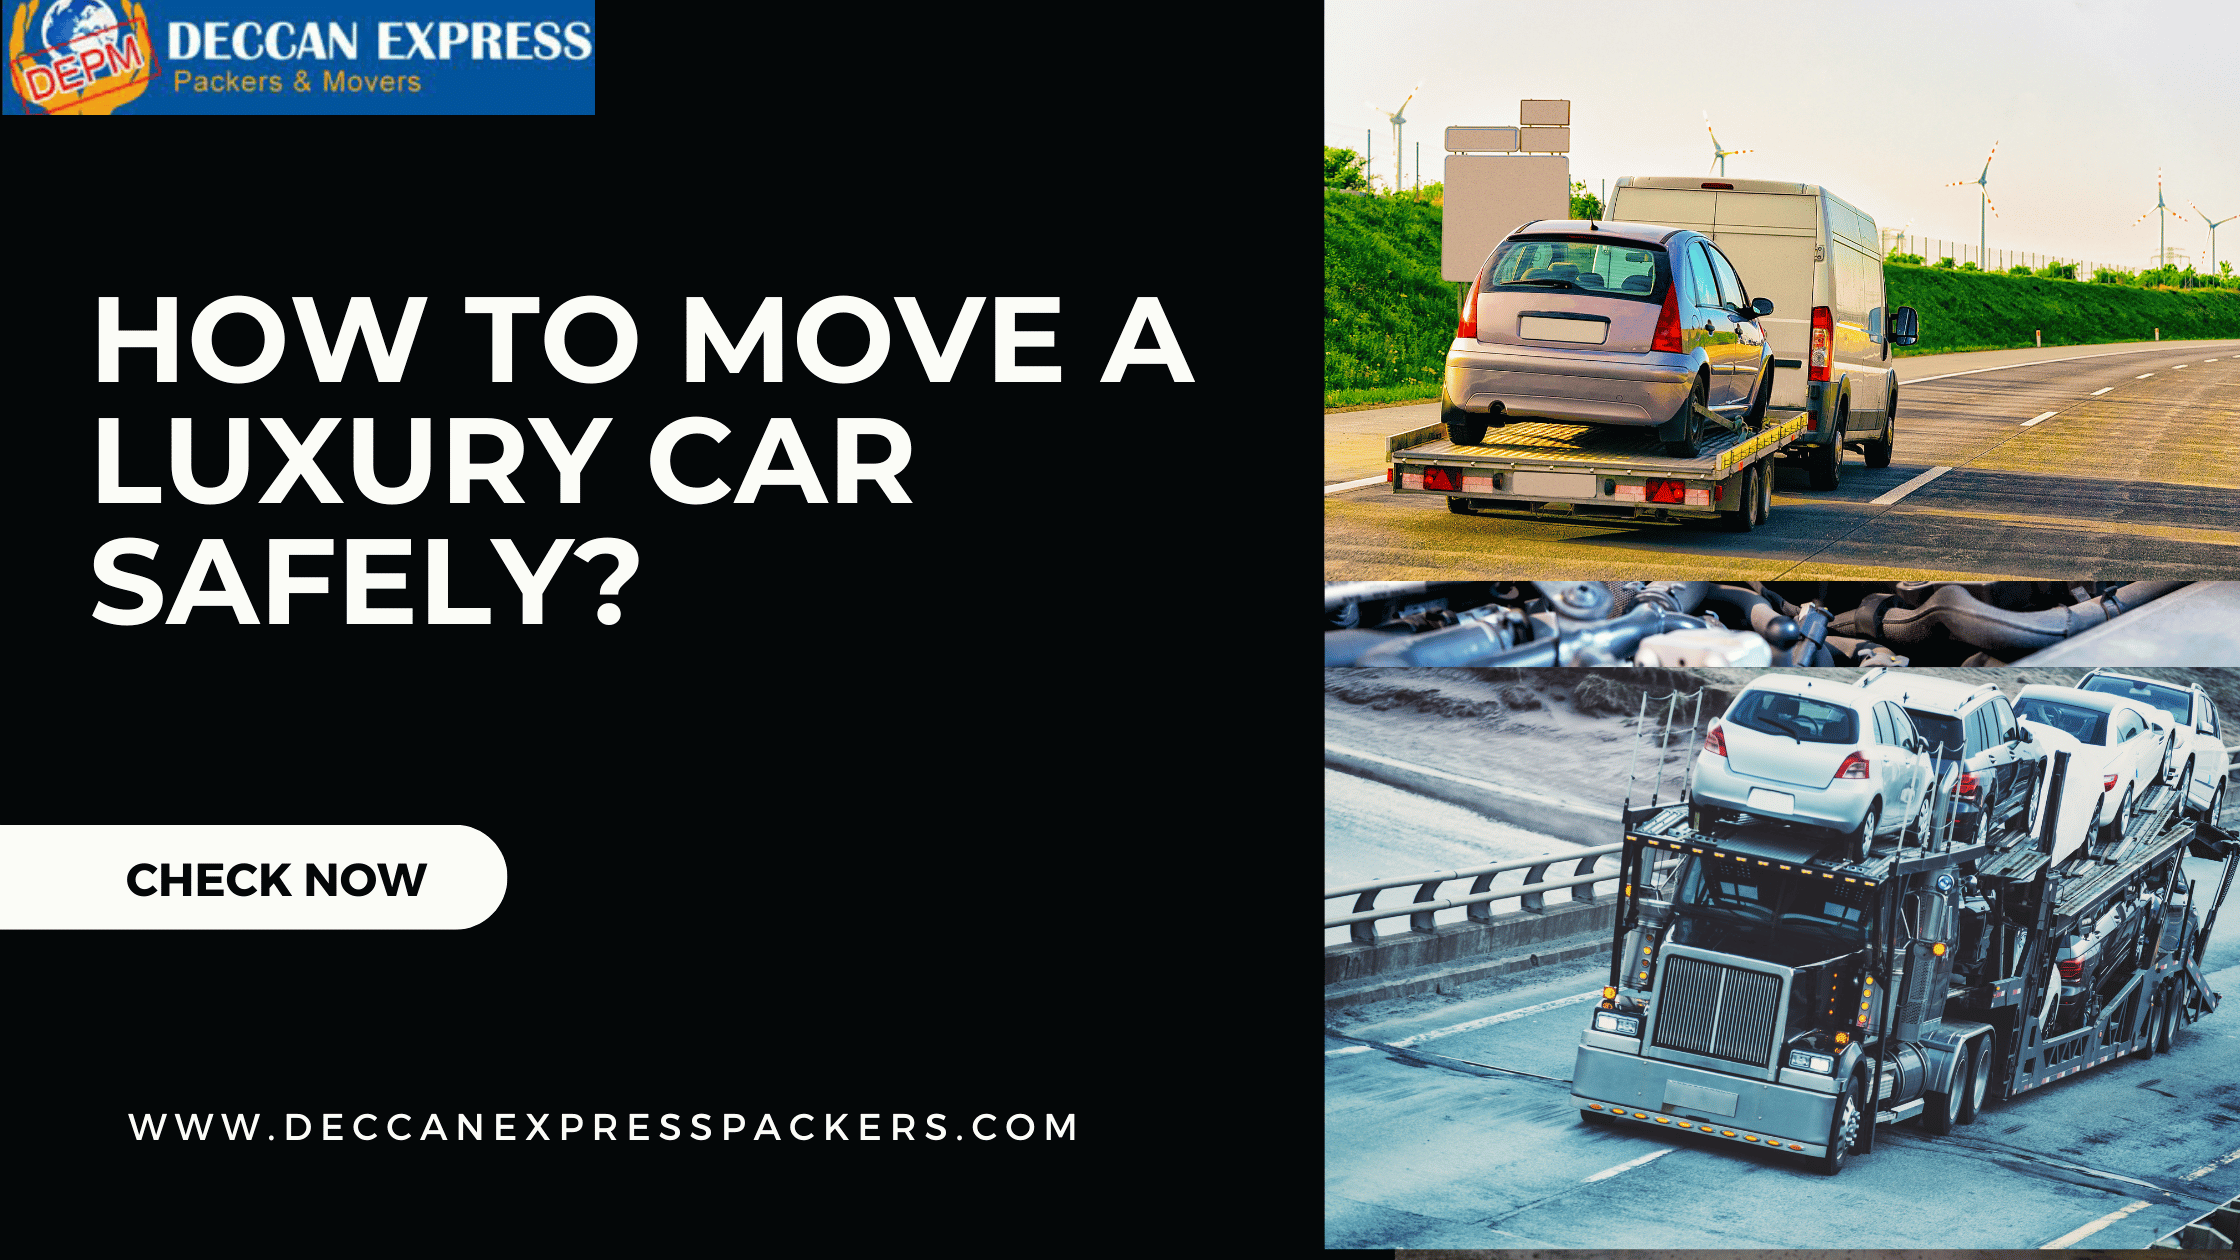 How to move a luxury car safely?